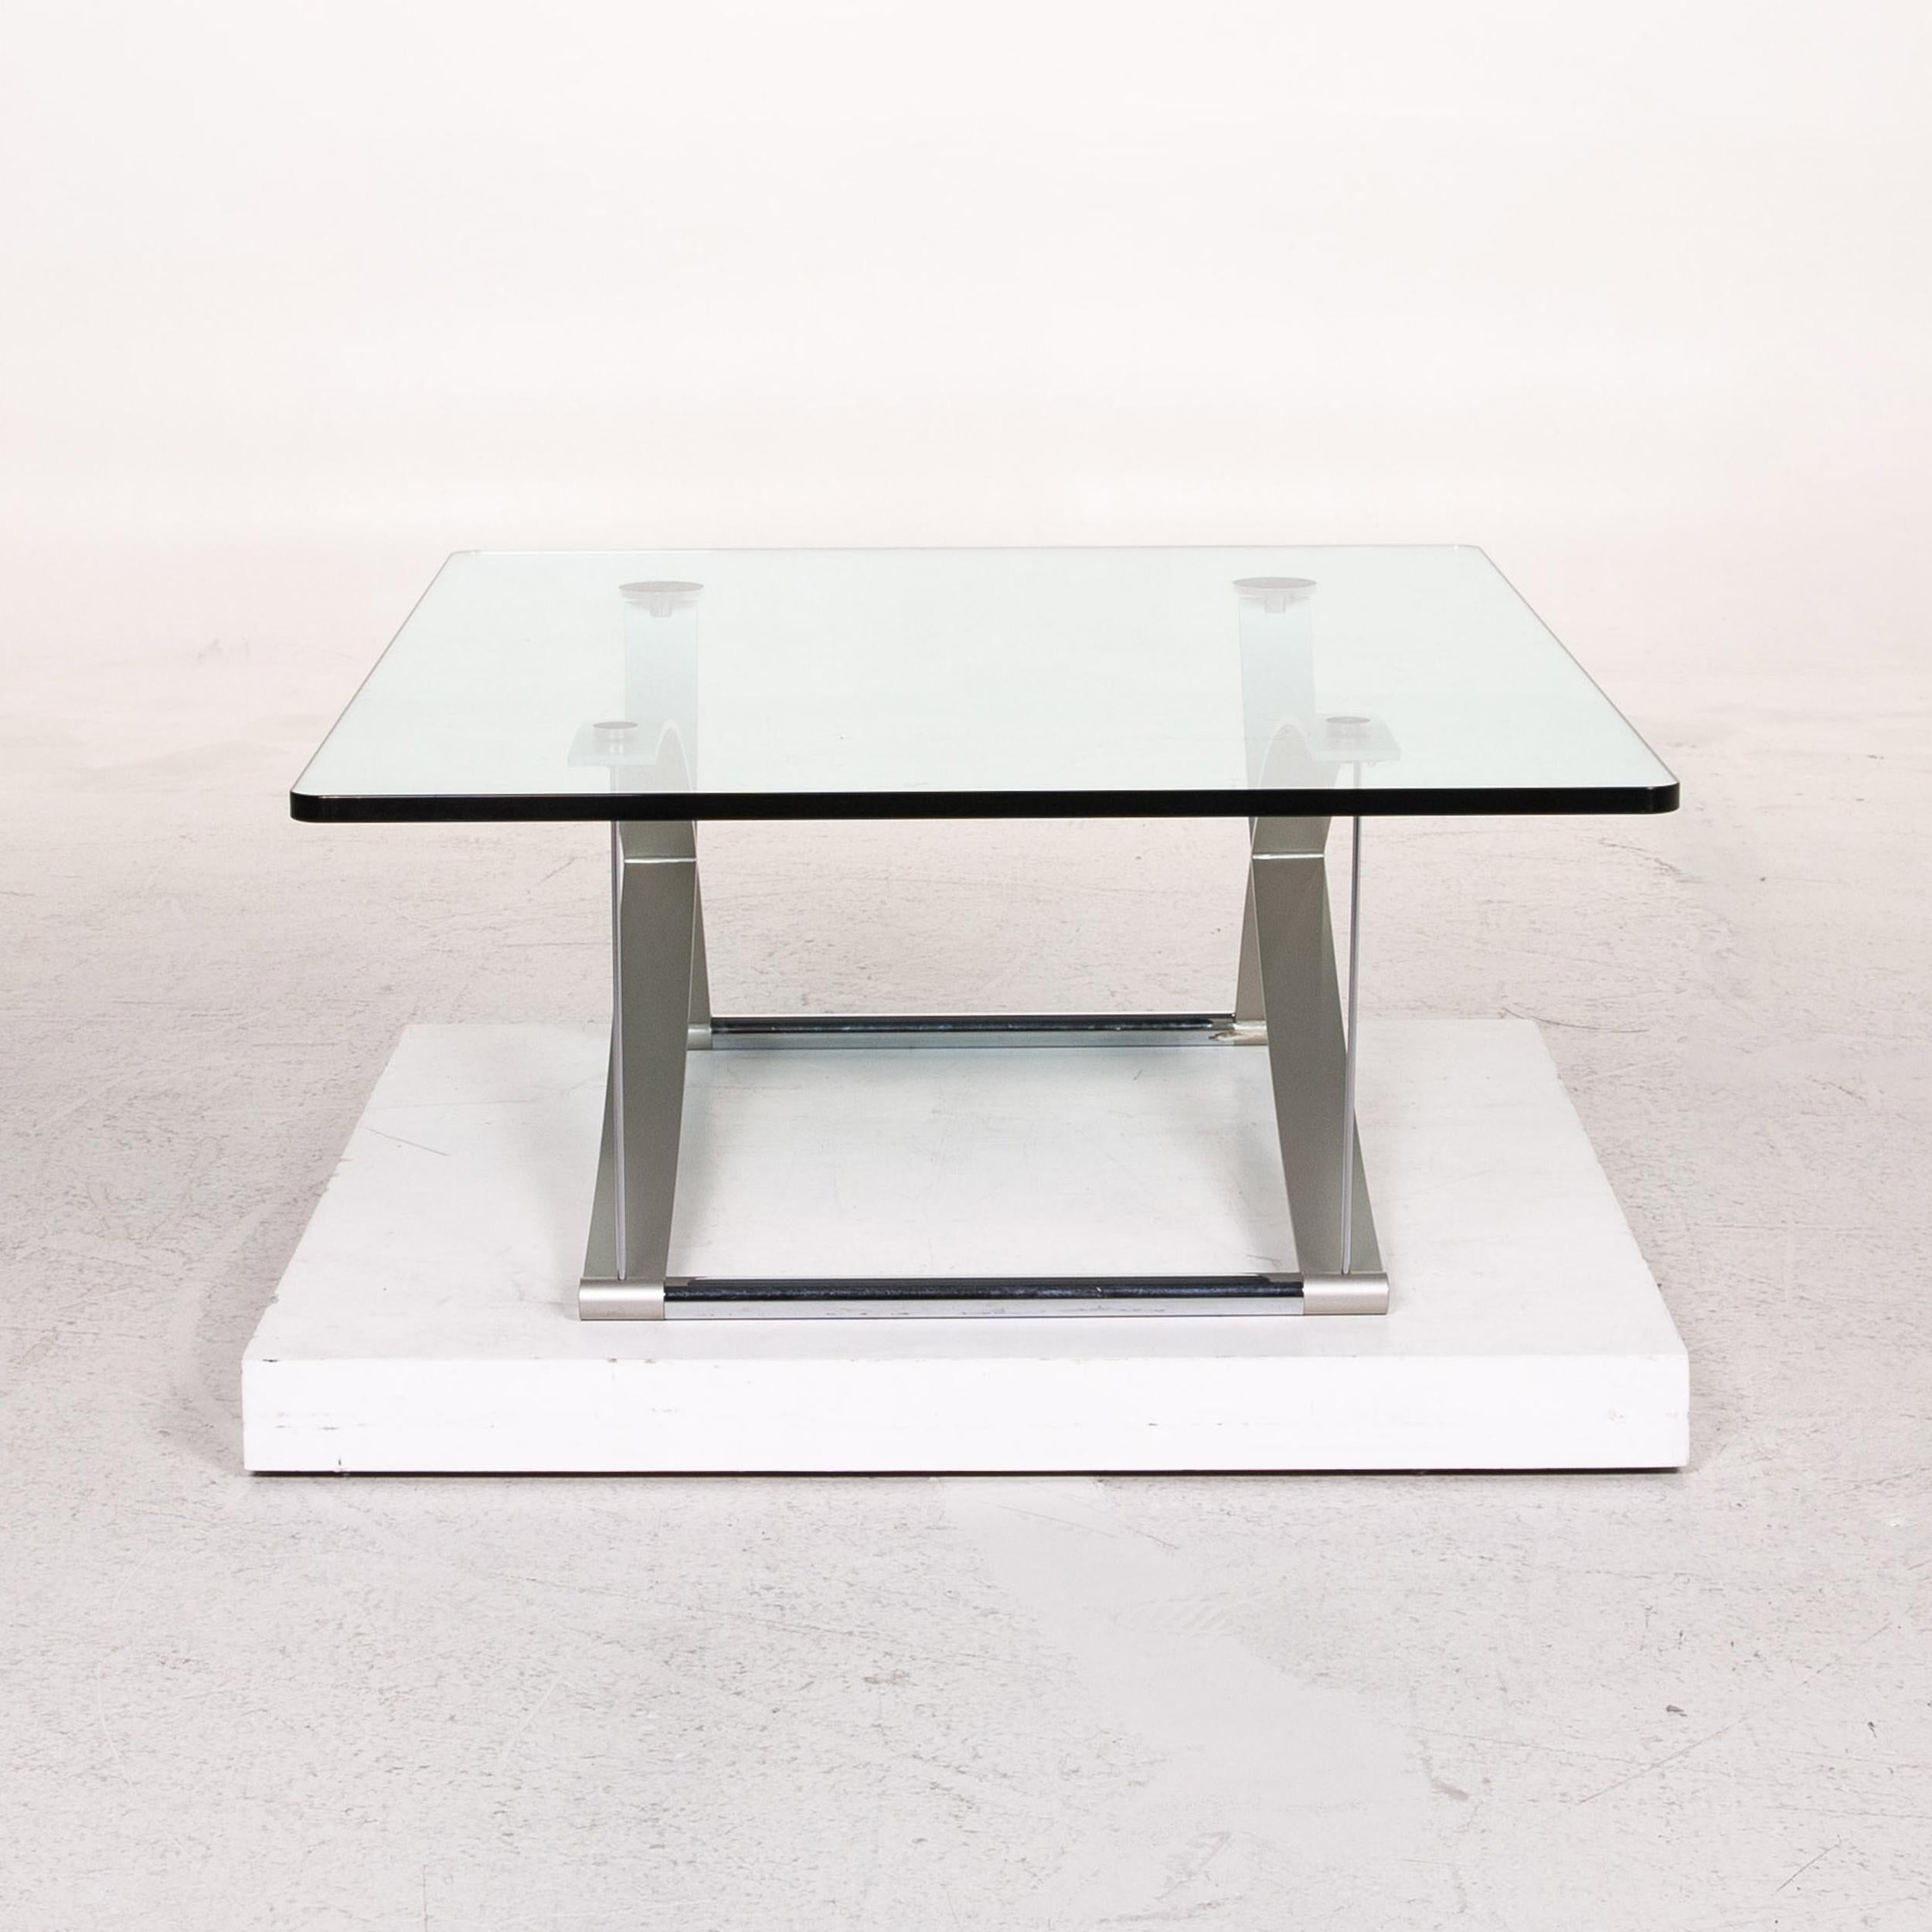 Rolf Benz Glass Coffee Table Metal Table 1